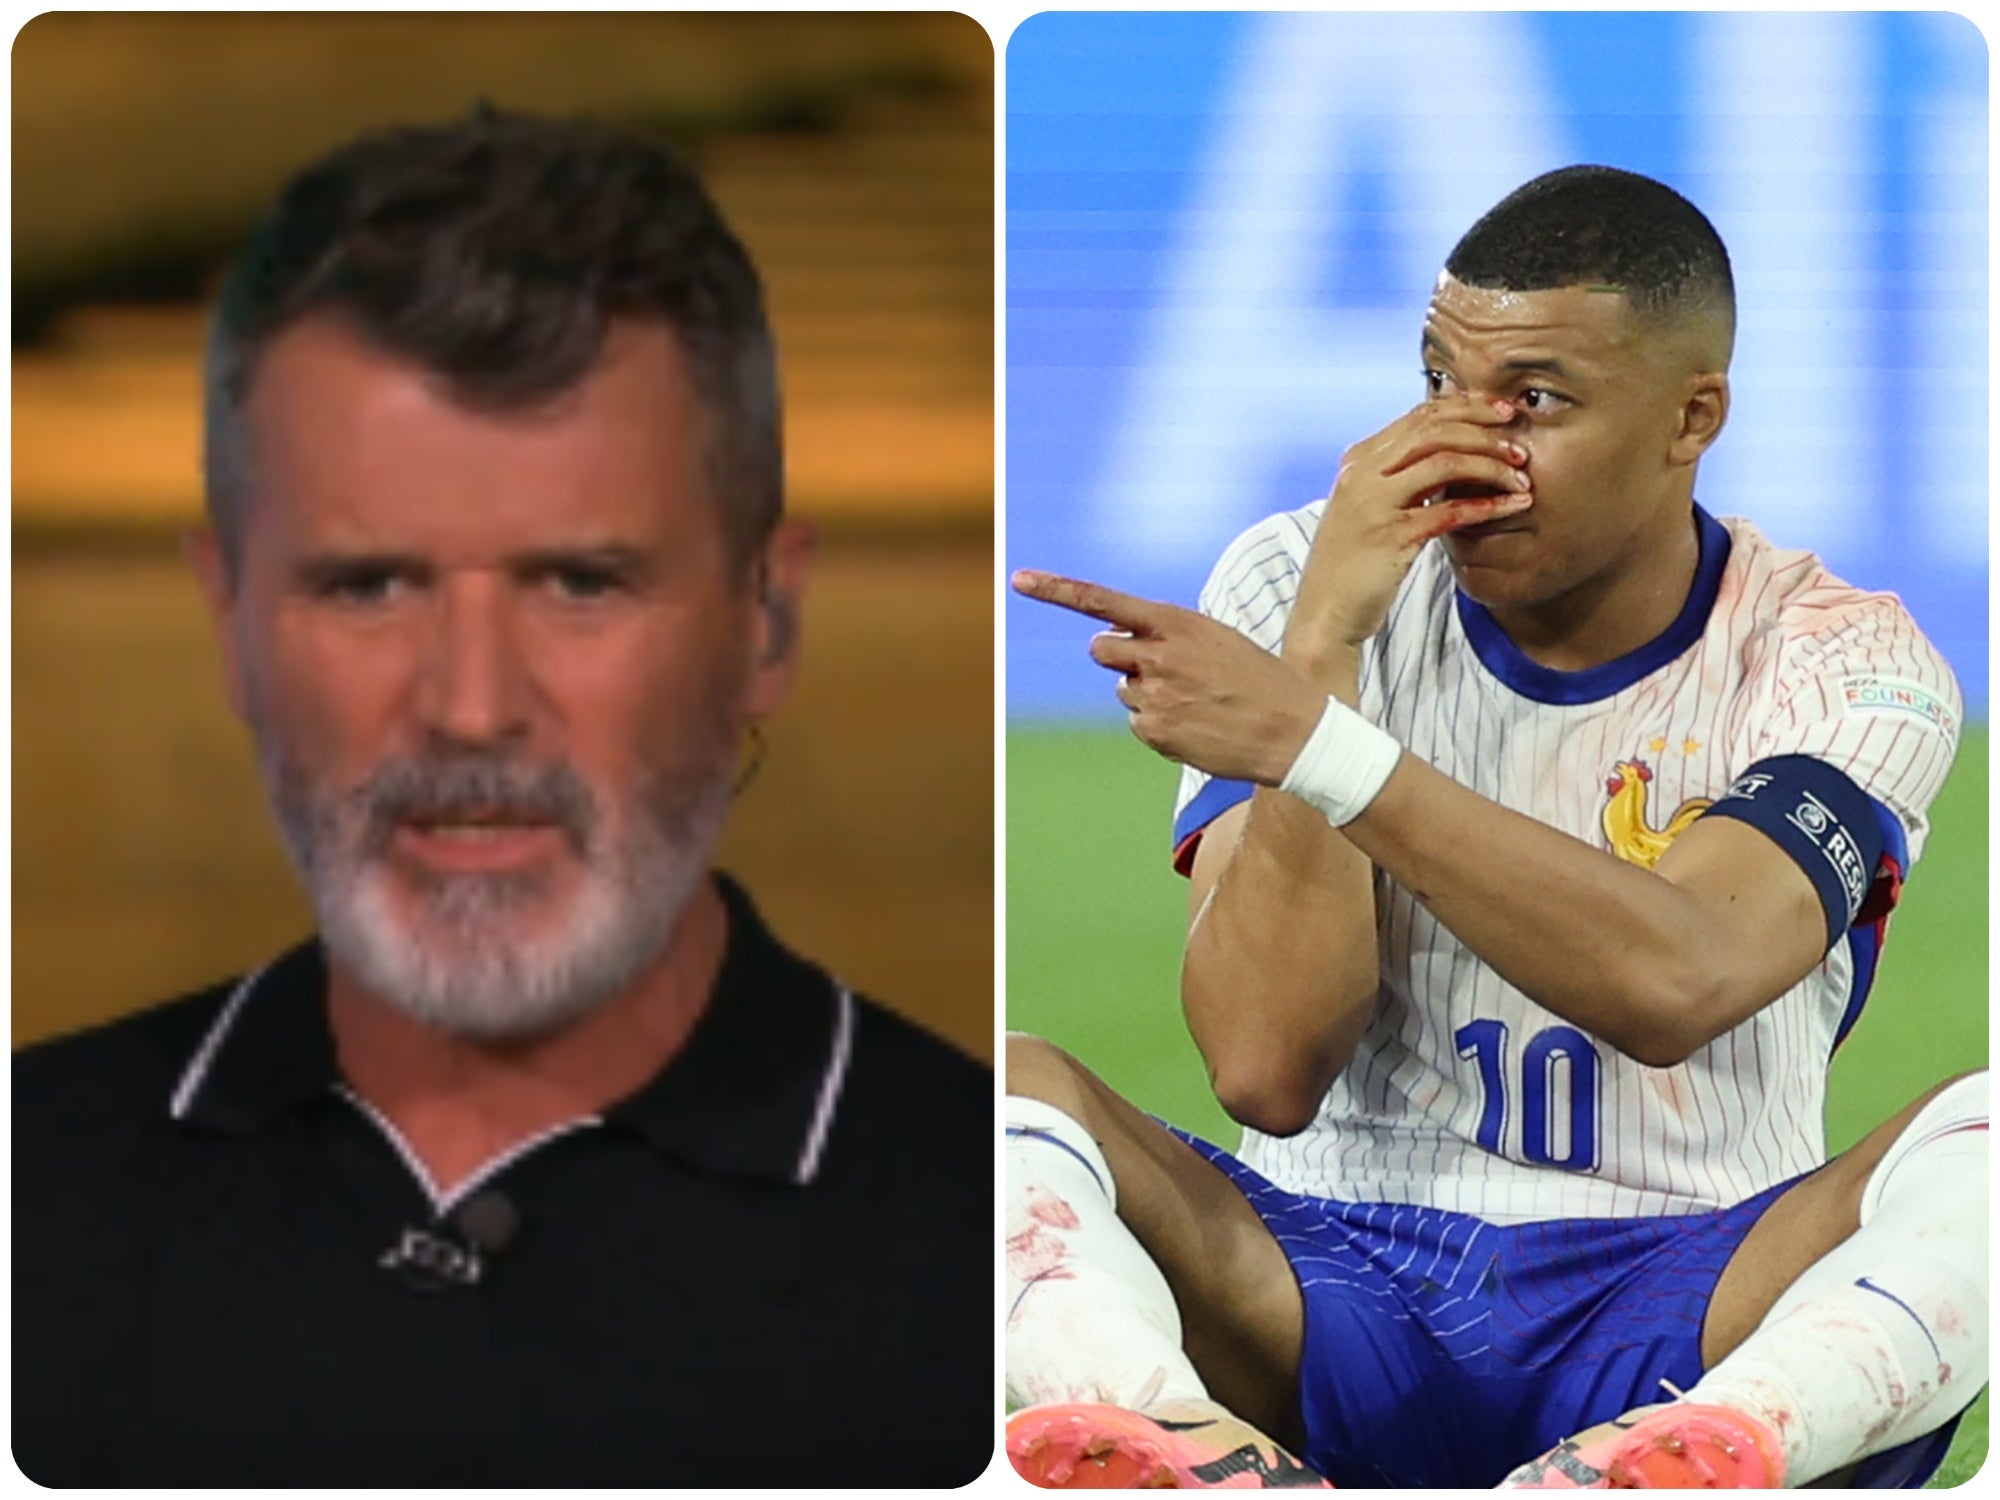 kylian mbappe, roy keane, didier deschamps, france, austria, roy keane blasts kylian mbappé after bloody nose incident: ‘this is out of order’